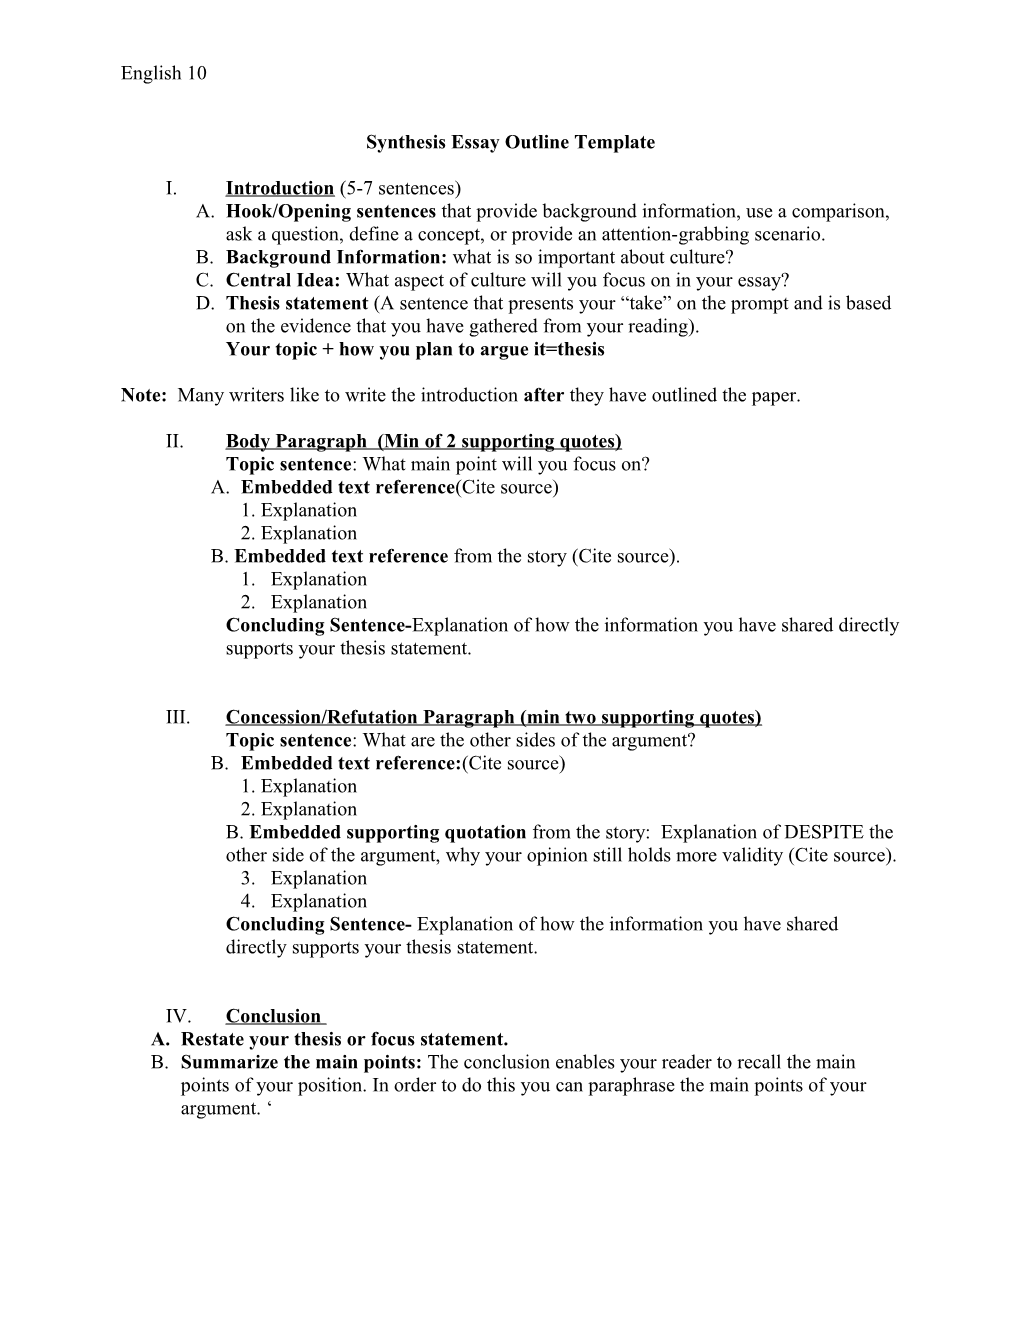 Synthesis Essay Outline Template